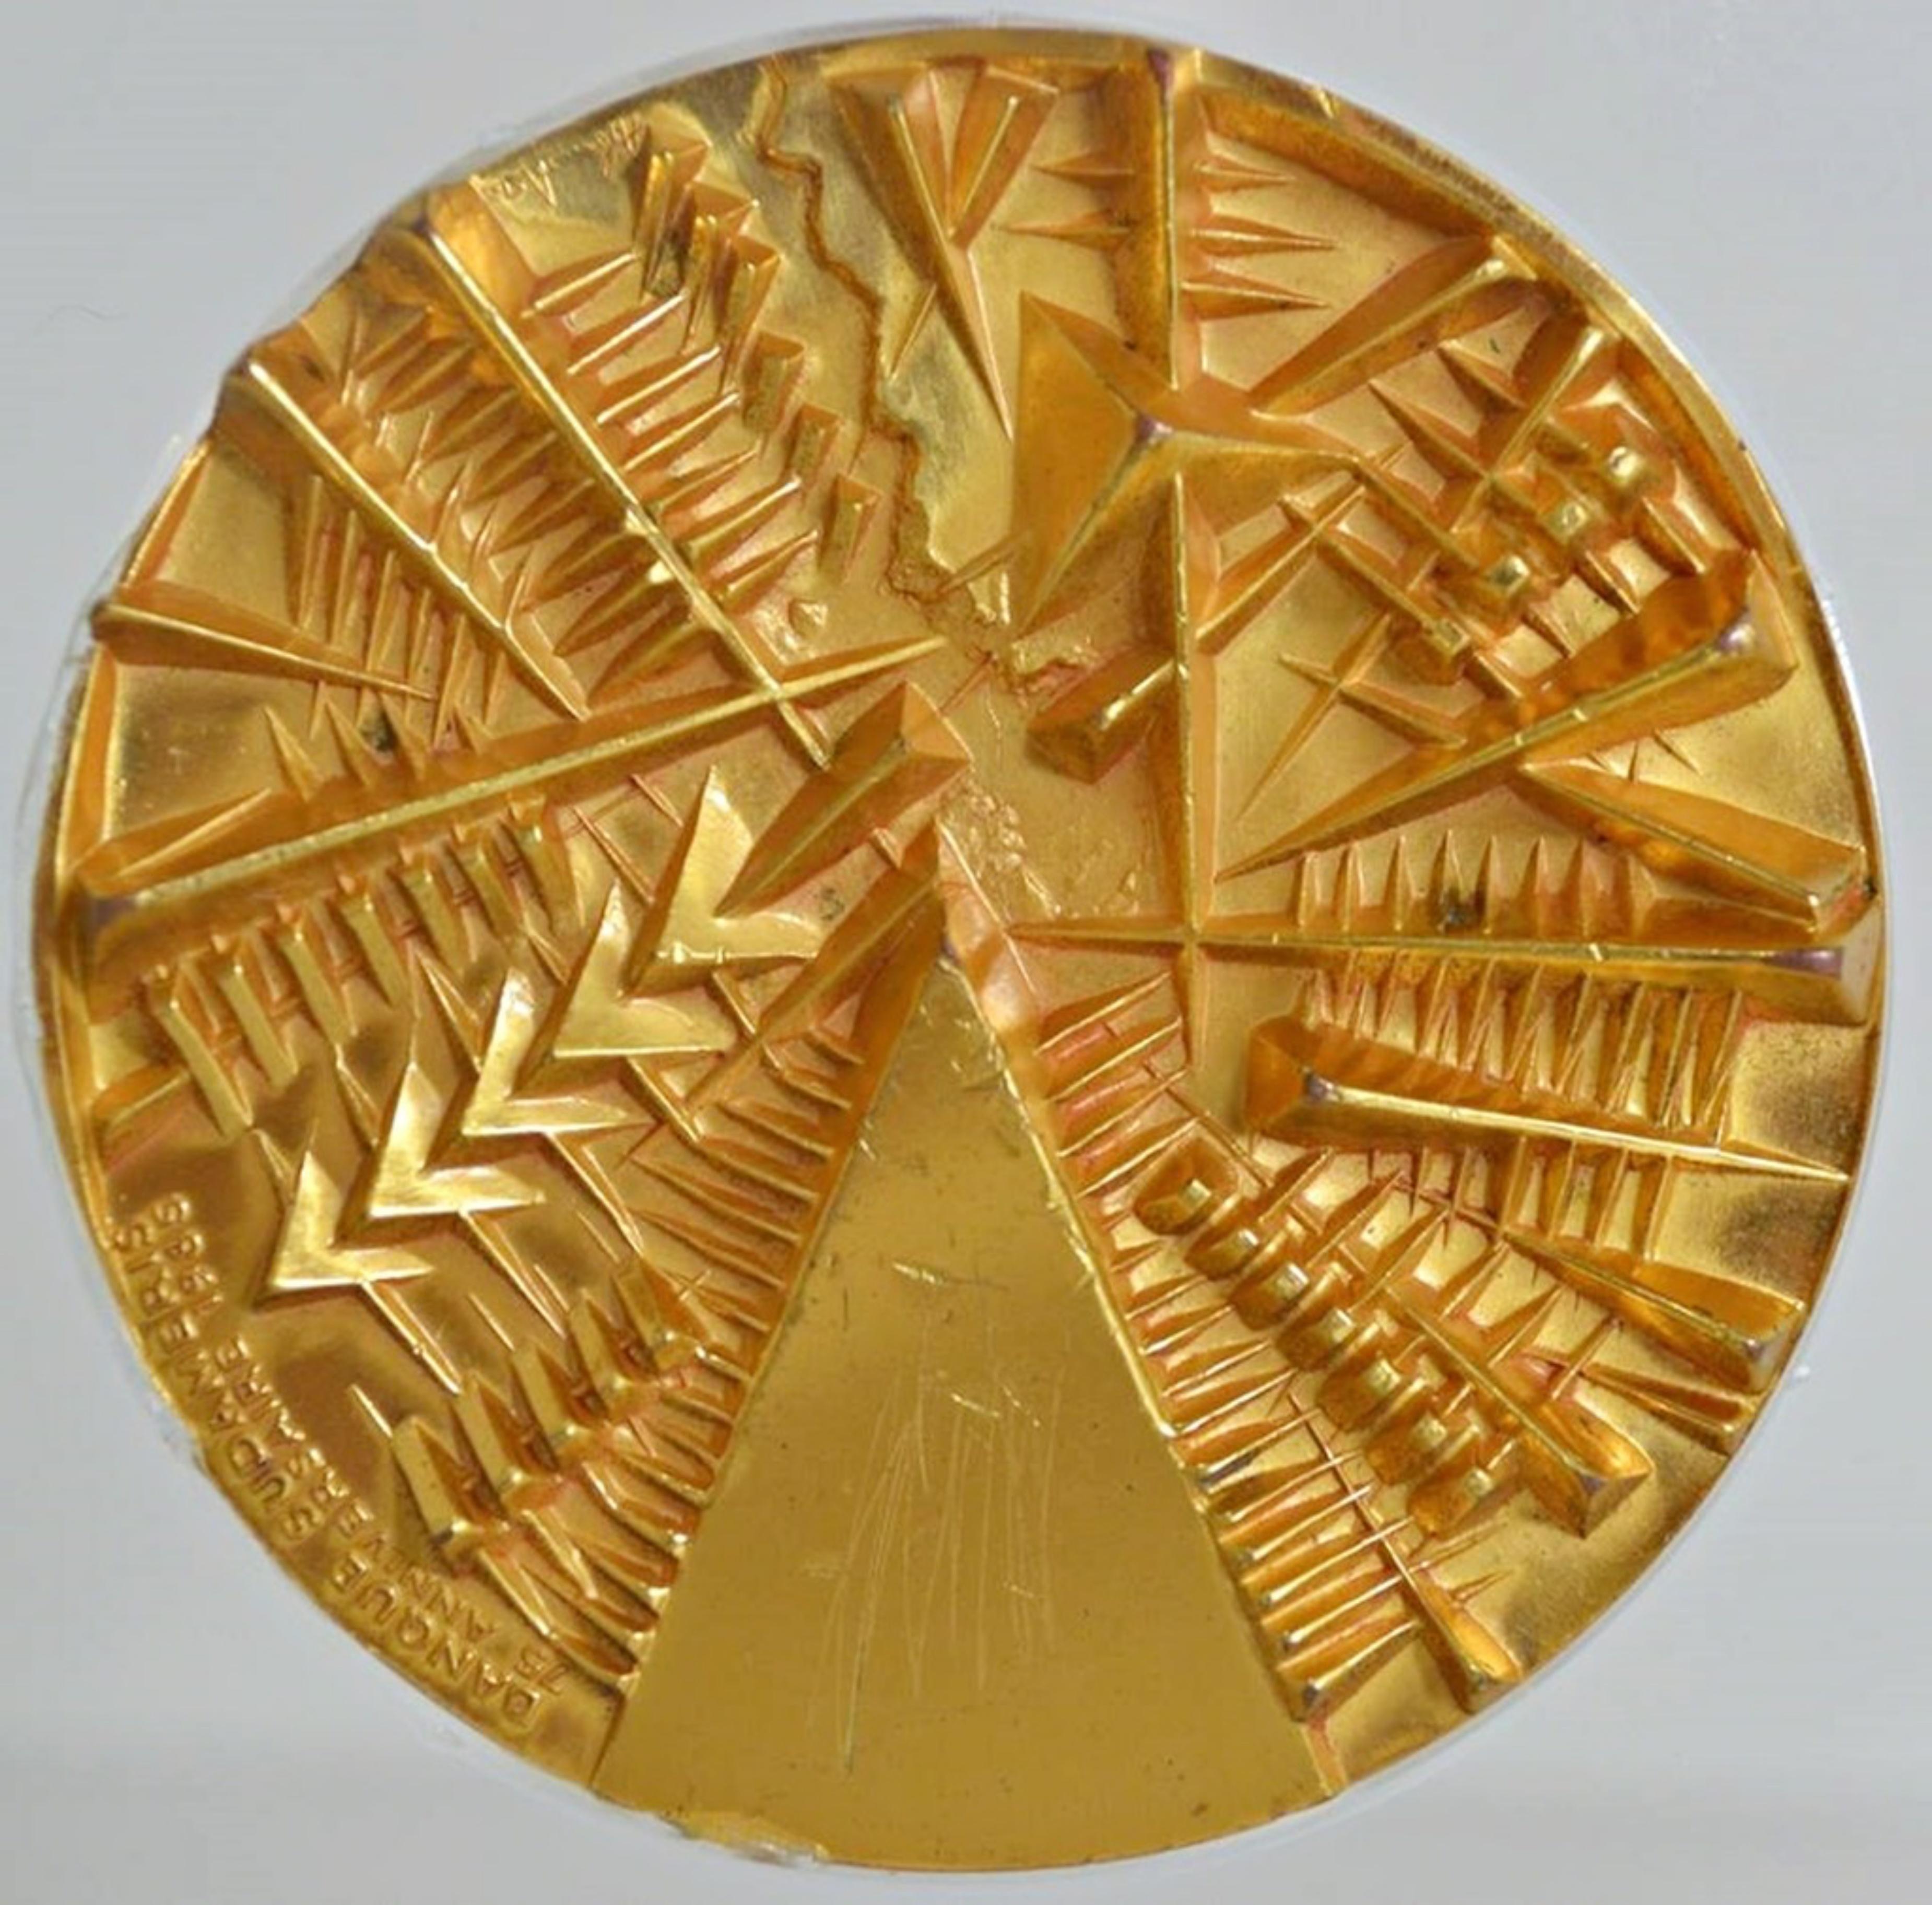 Double Sided Gold Plated Medallion (Limited Edition; Signed and Stamped)  - Art by Arnaldo Pomodoro